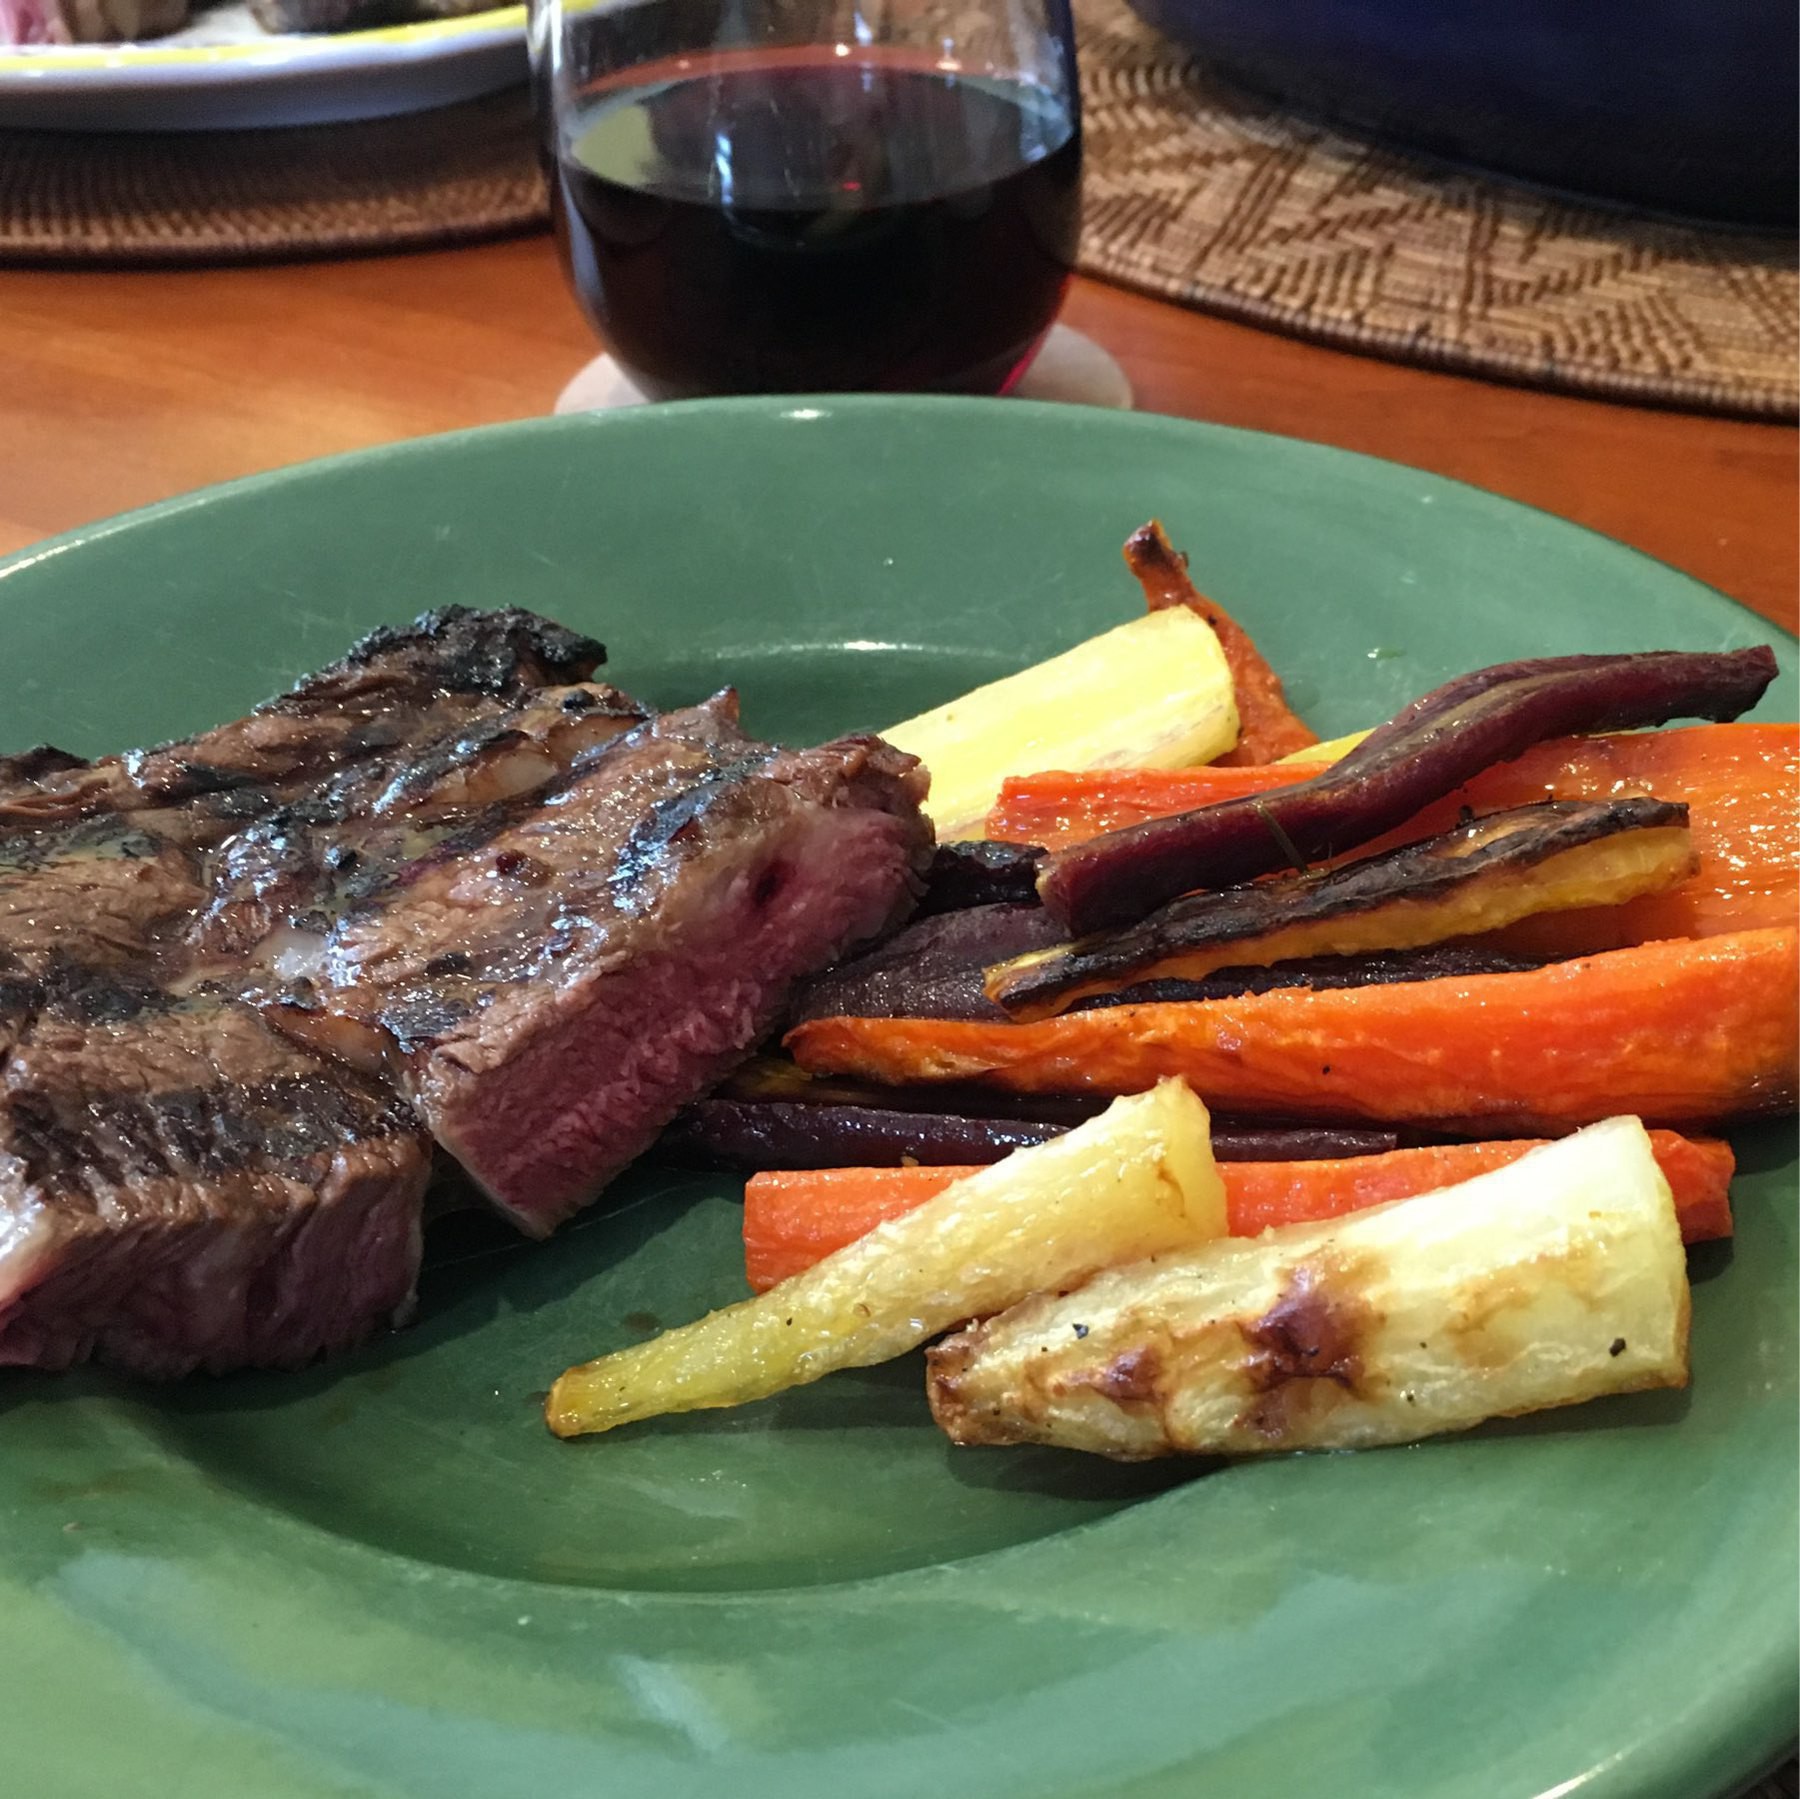 Grilled steak and roasted carrots, served